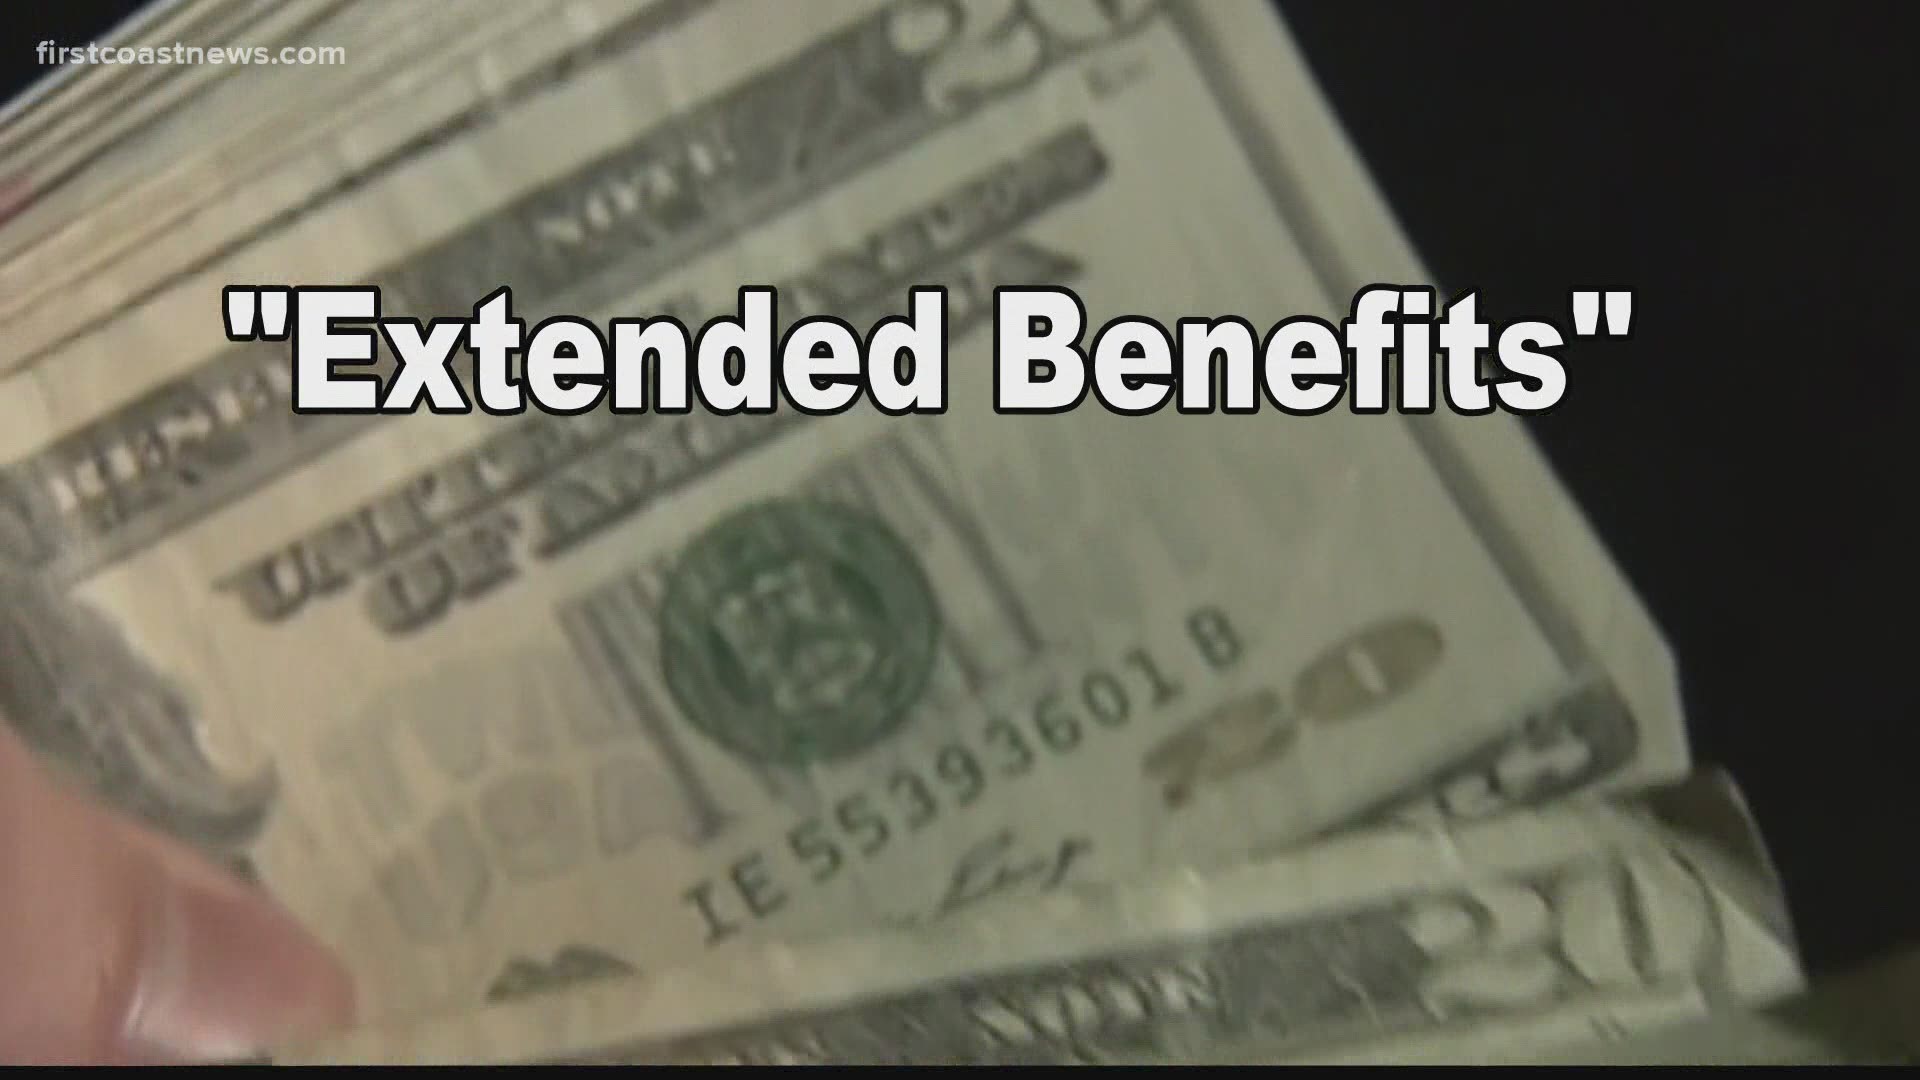 People collecting unemployment benefits may see yet another change in benefits over the next few weeks as the state may need to implement extended benefits.